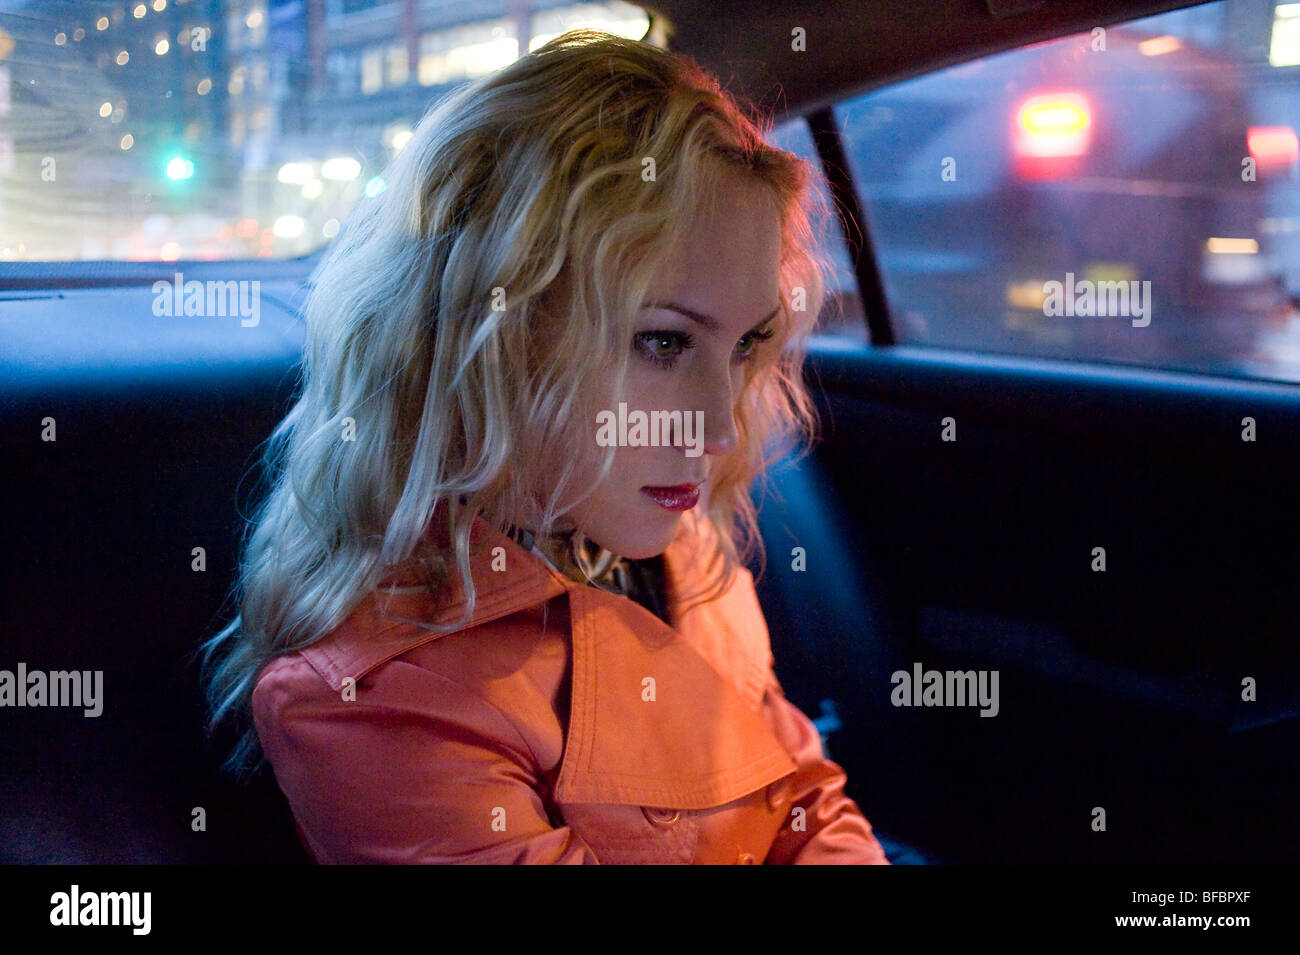 Determined woman riding in taxi cab at night New York City Stock Photo